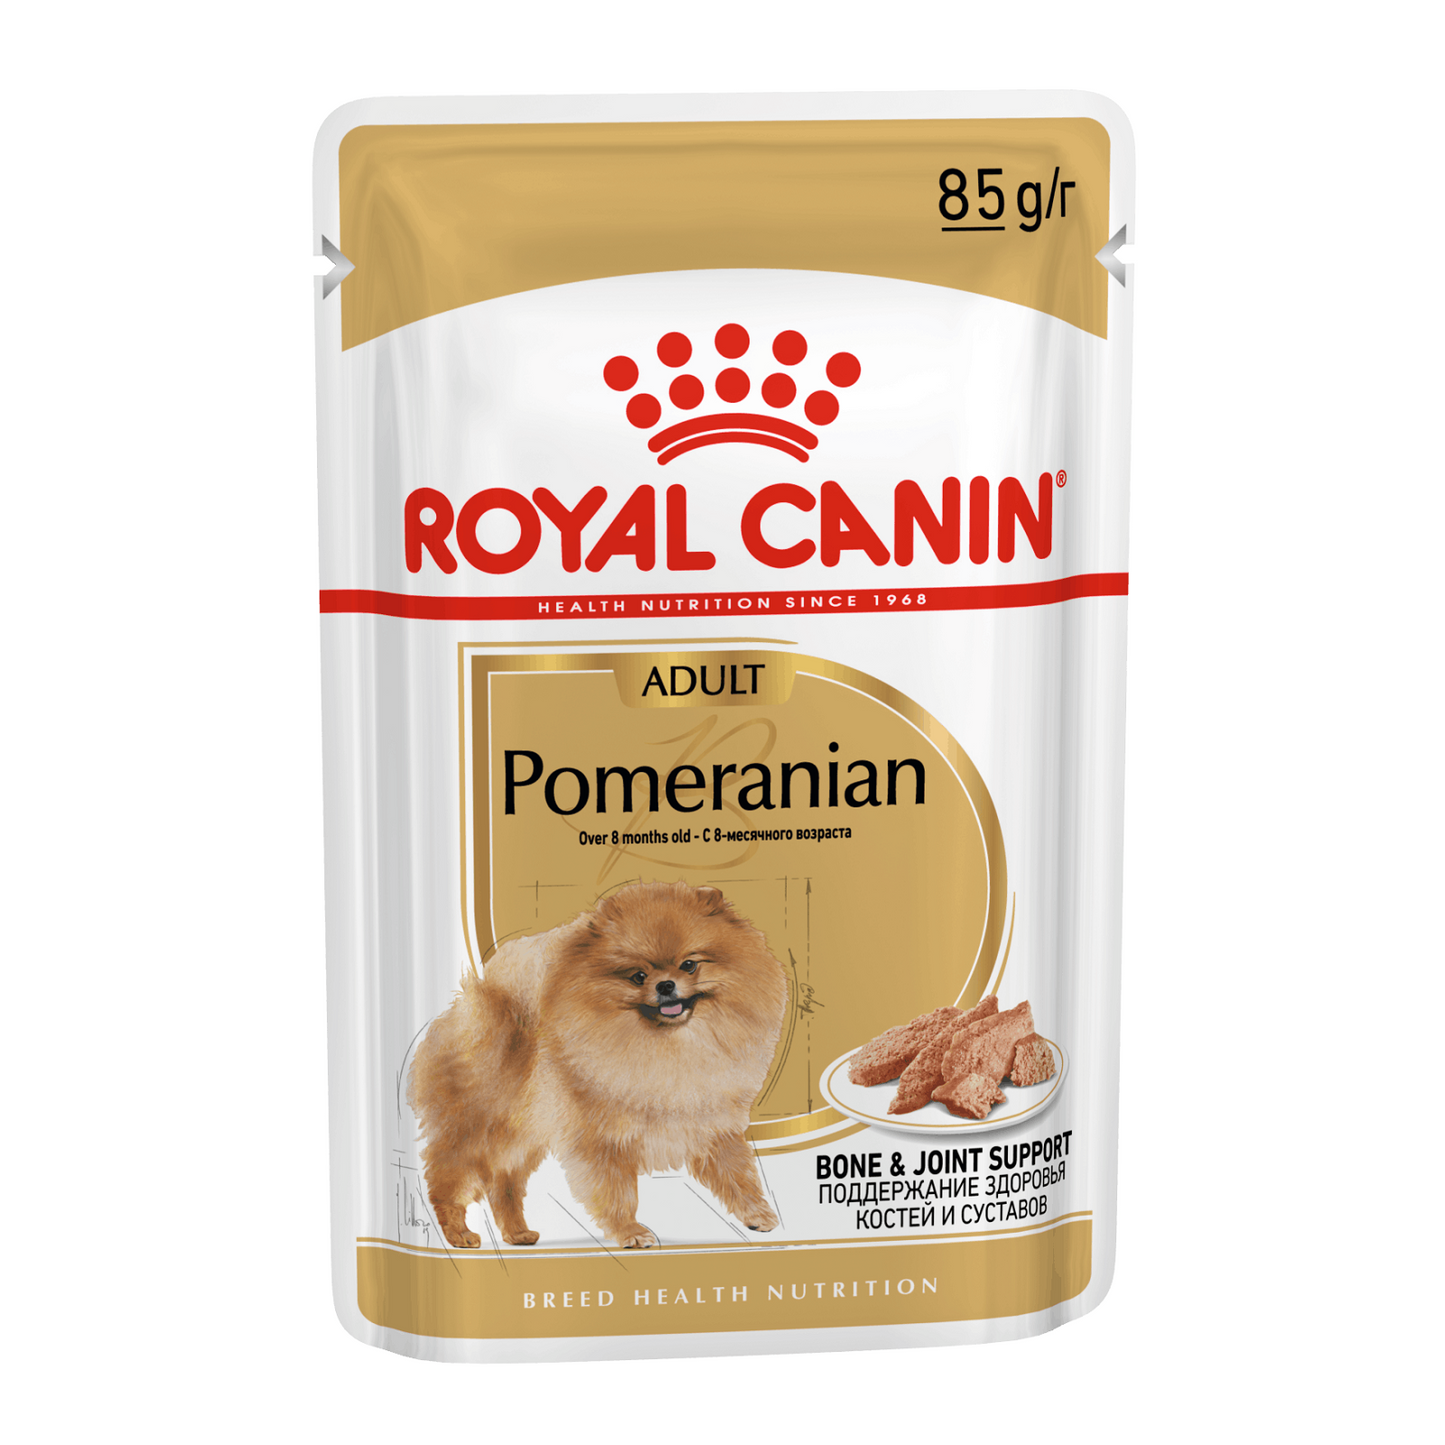 ROYAL CANIN - Pomeranian Adult Pouches (12 x 85g)